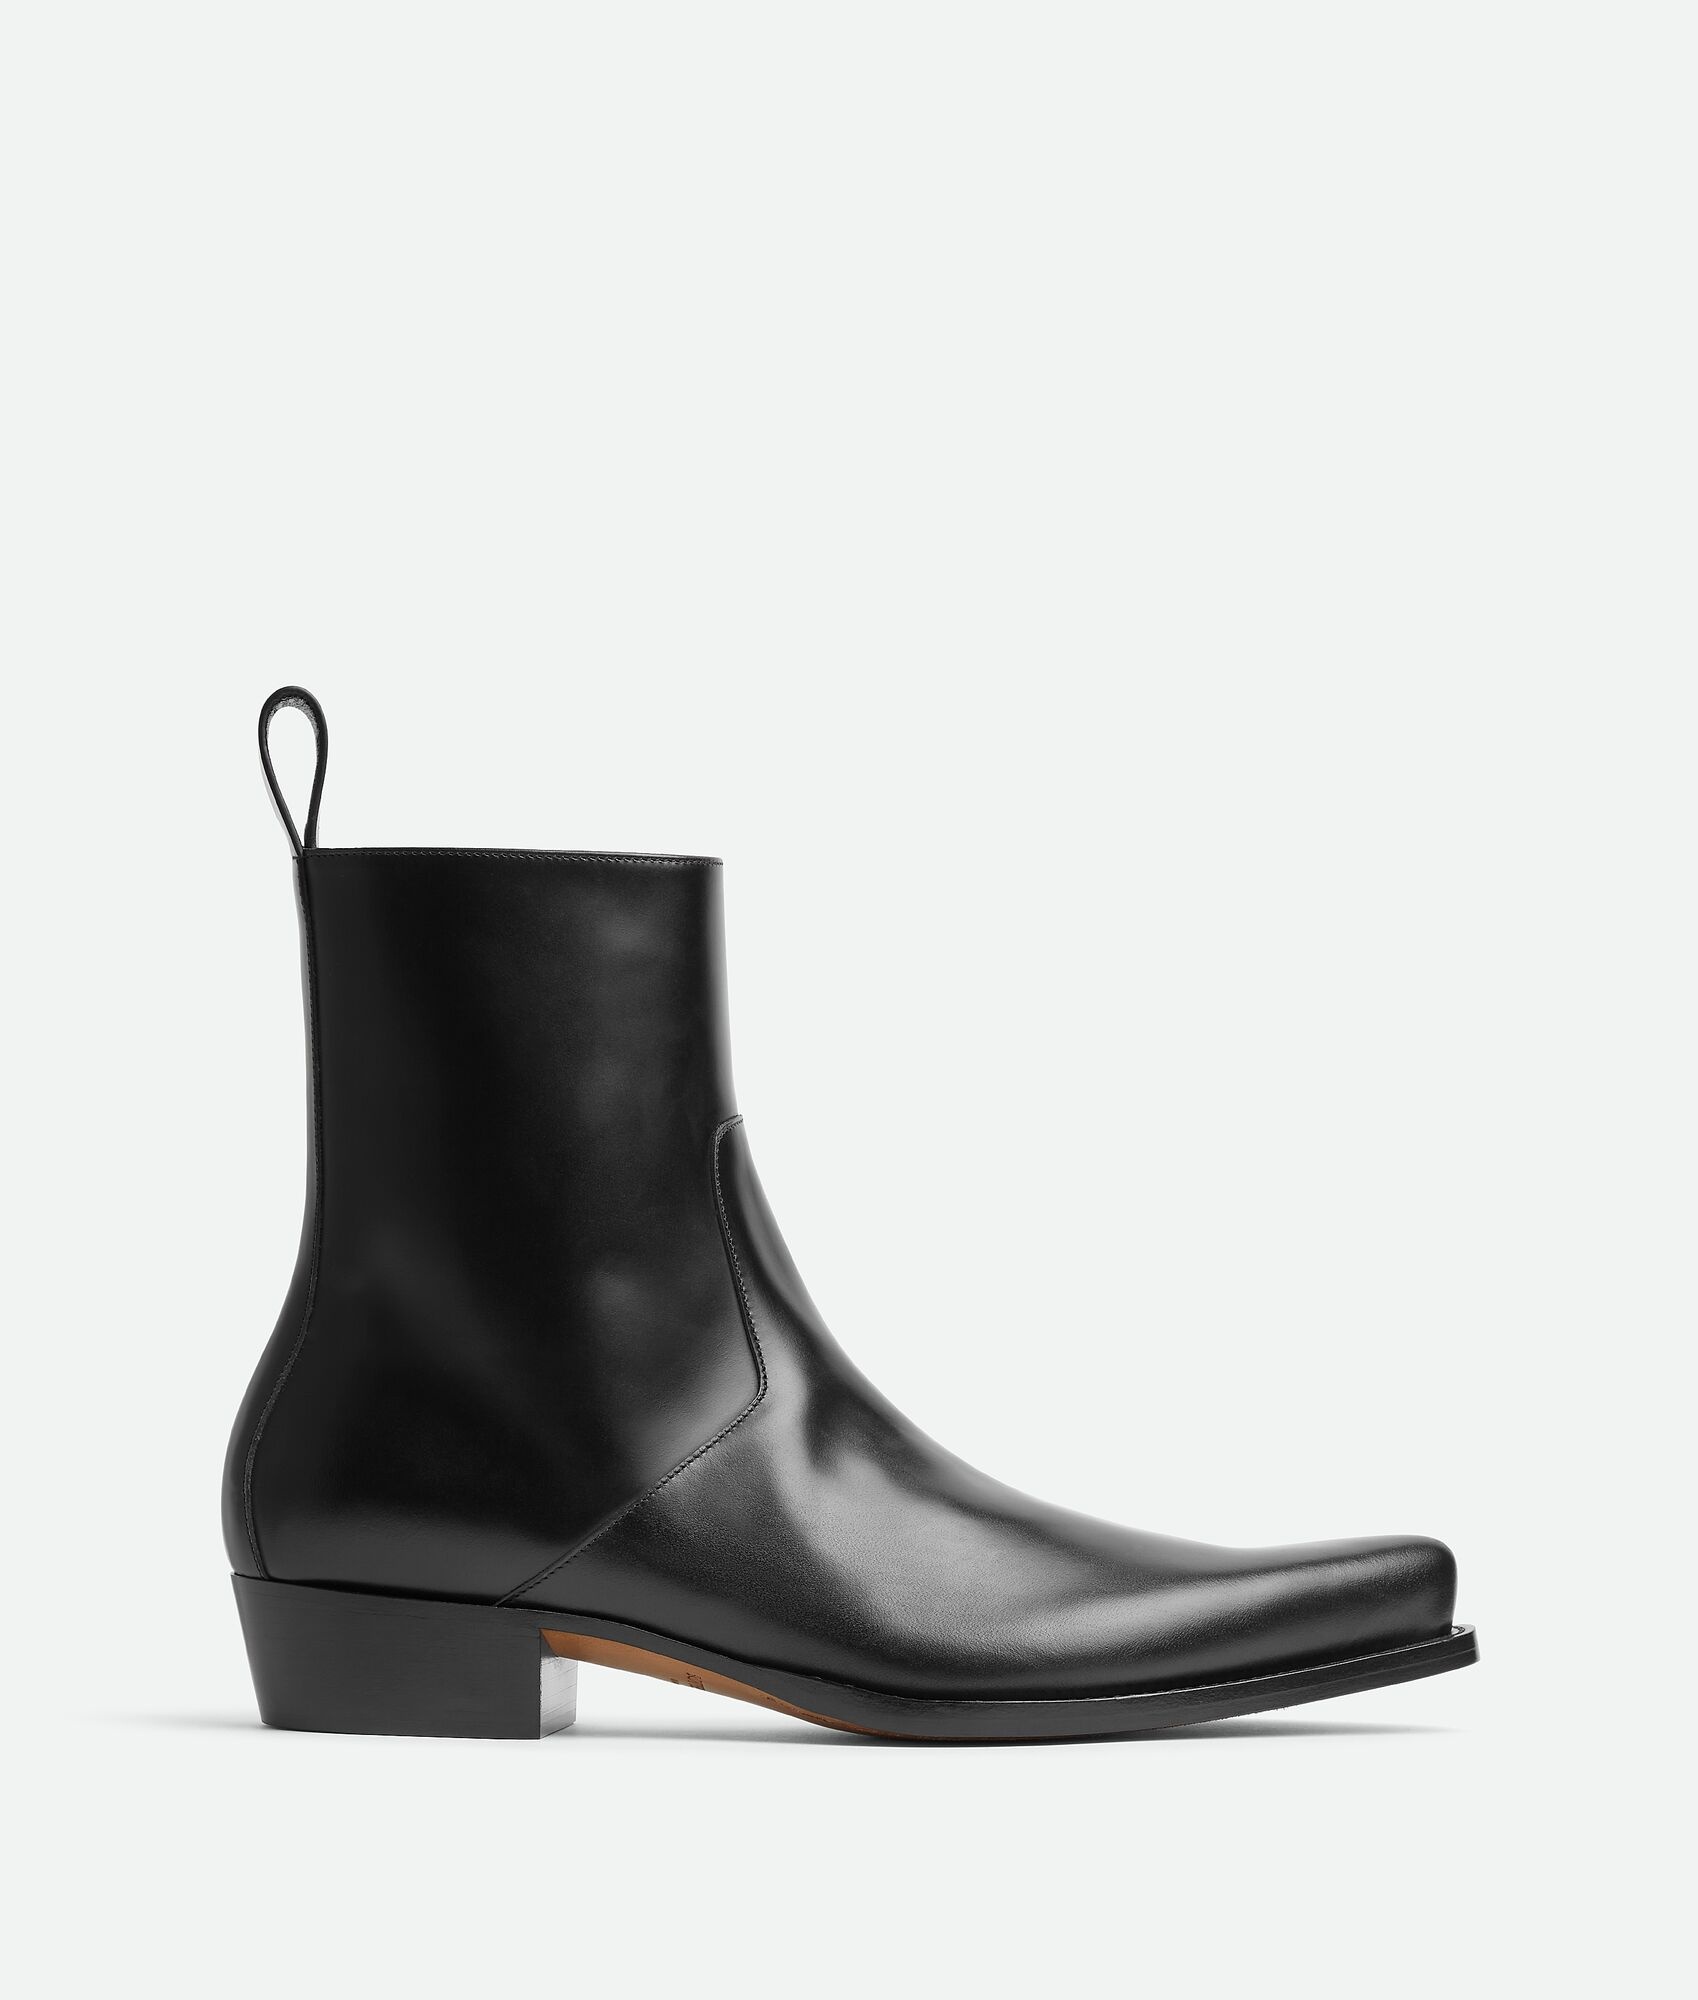 Ripley Ankle Boot - 1